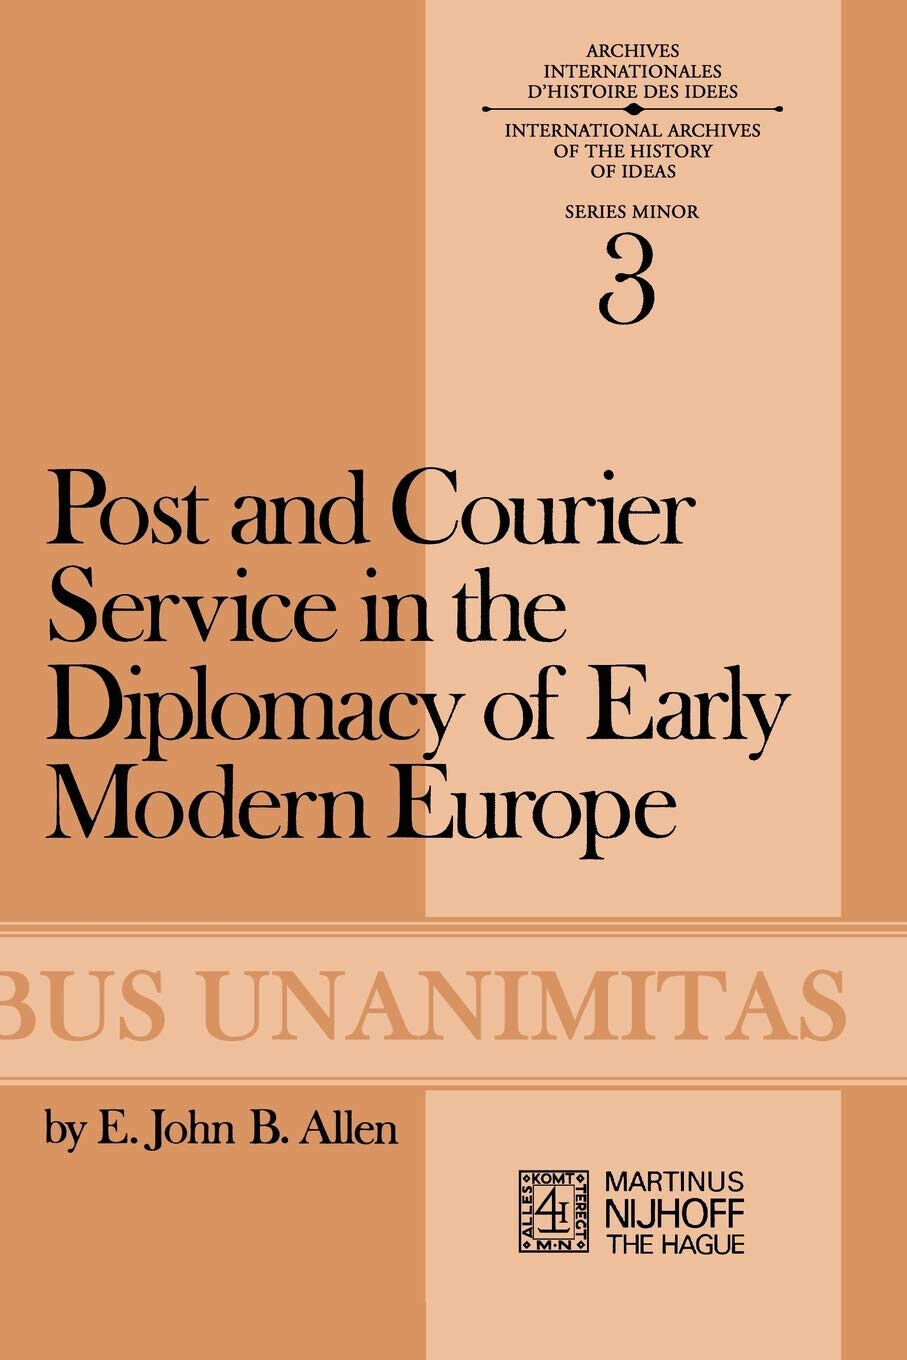 Post and Courier Service in the Diplomacy of Early Modern Europe - Springer,1972 libro usato